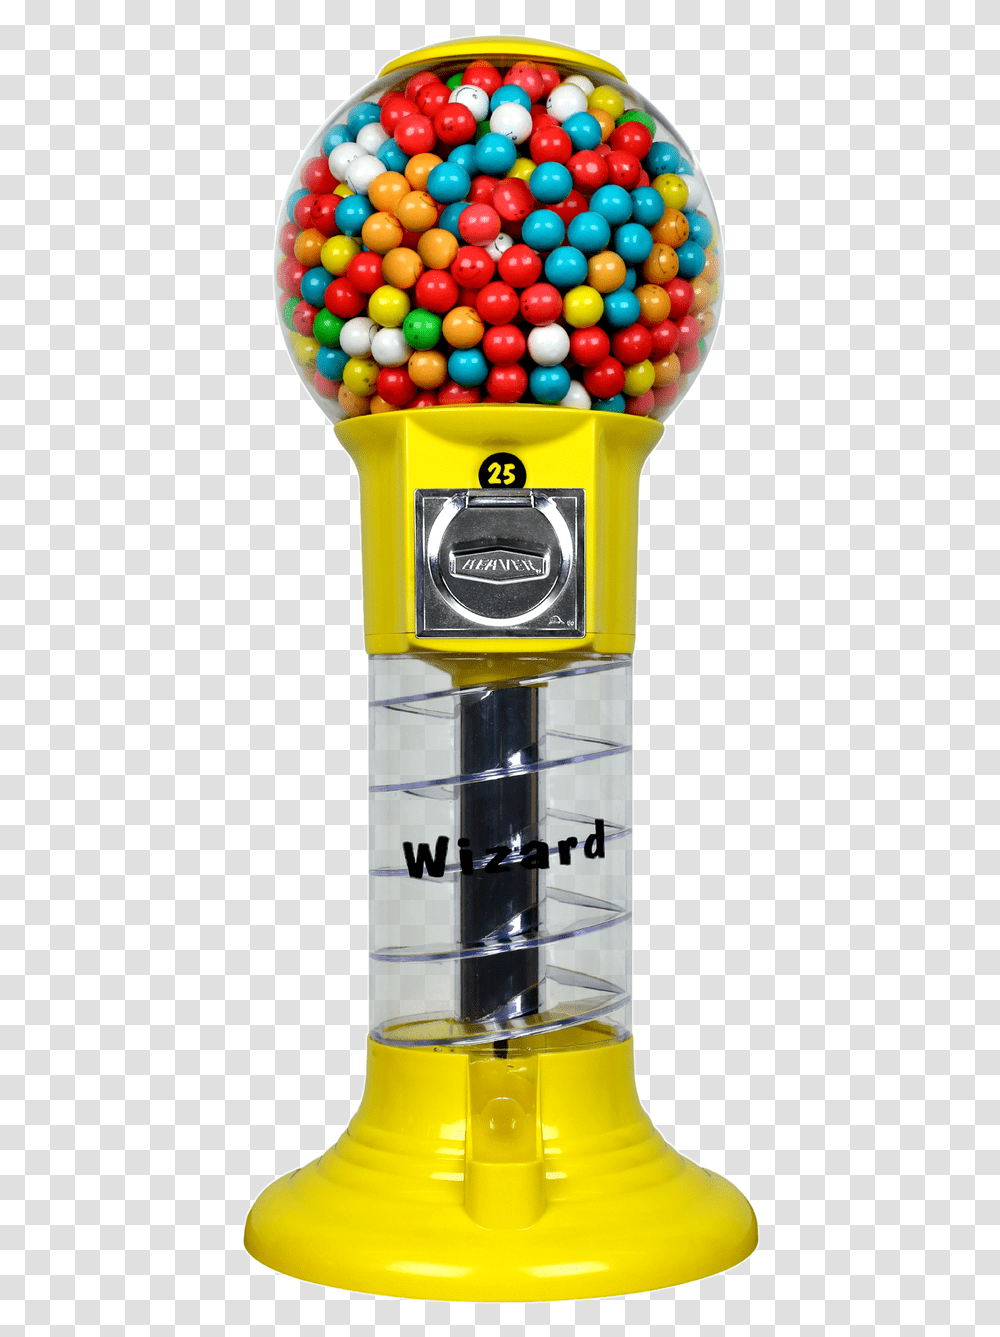 Lil Gumball Machine, Mixer, Appliance, Cup, Measuring Cup Transparent Png